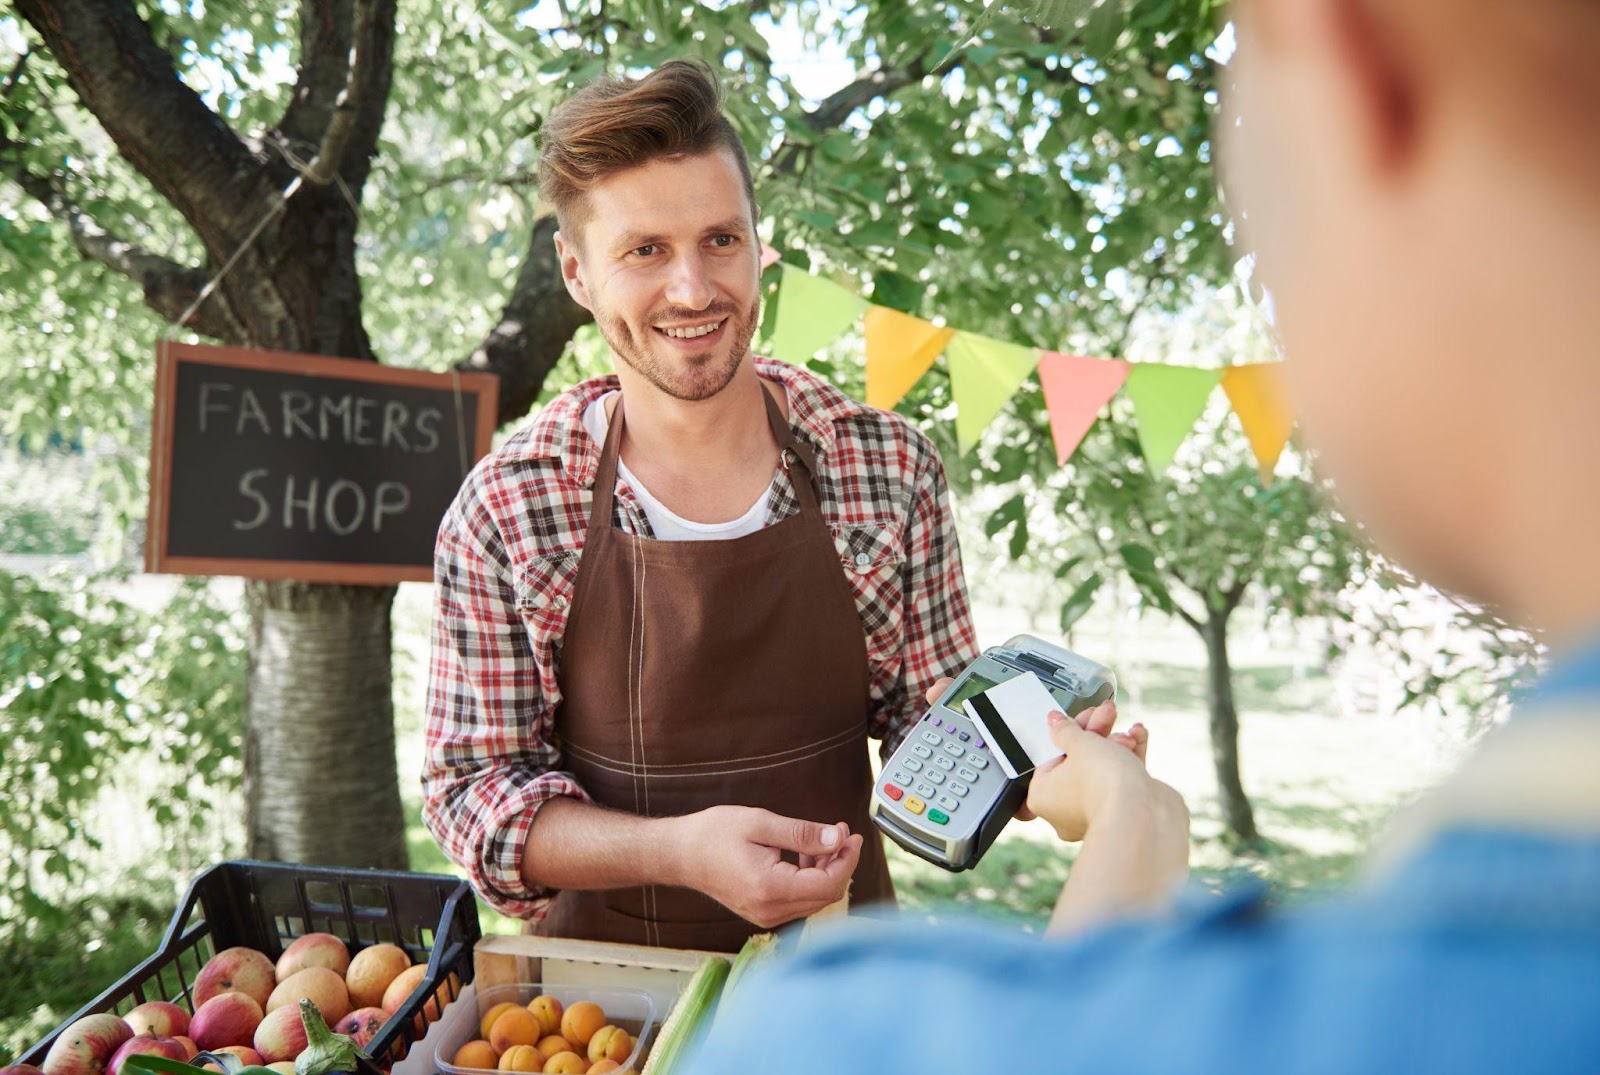 You can accept non-cash payments even in street markets thanks to Shopify POS.